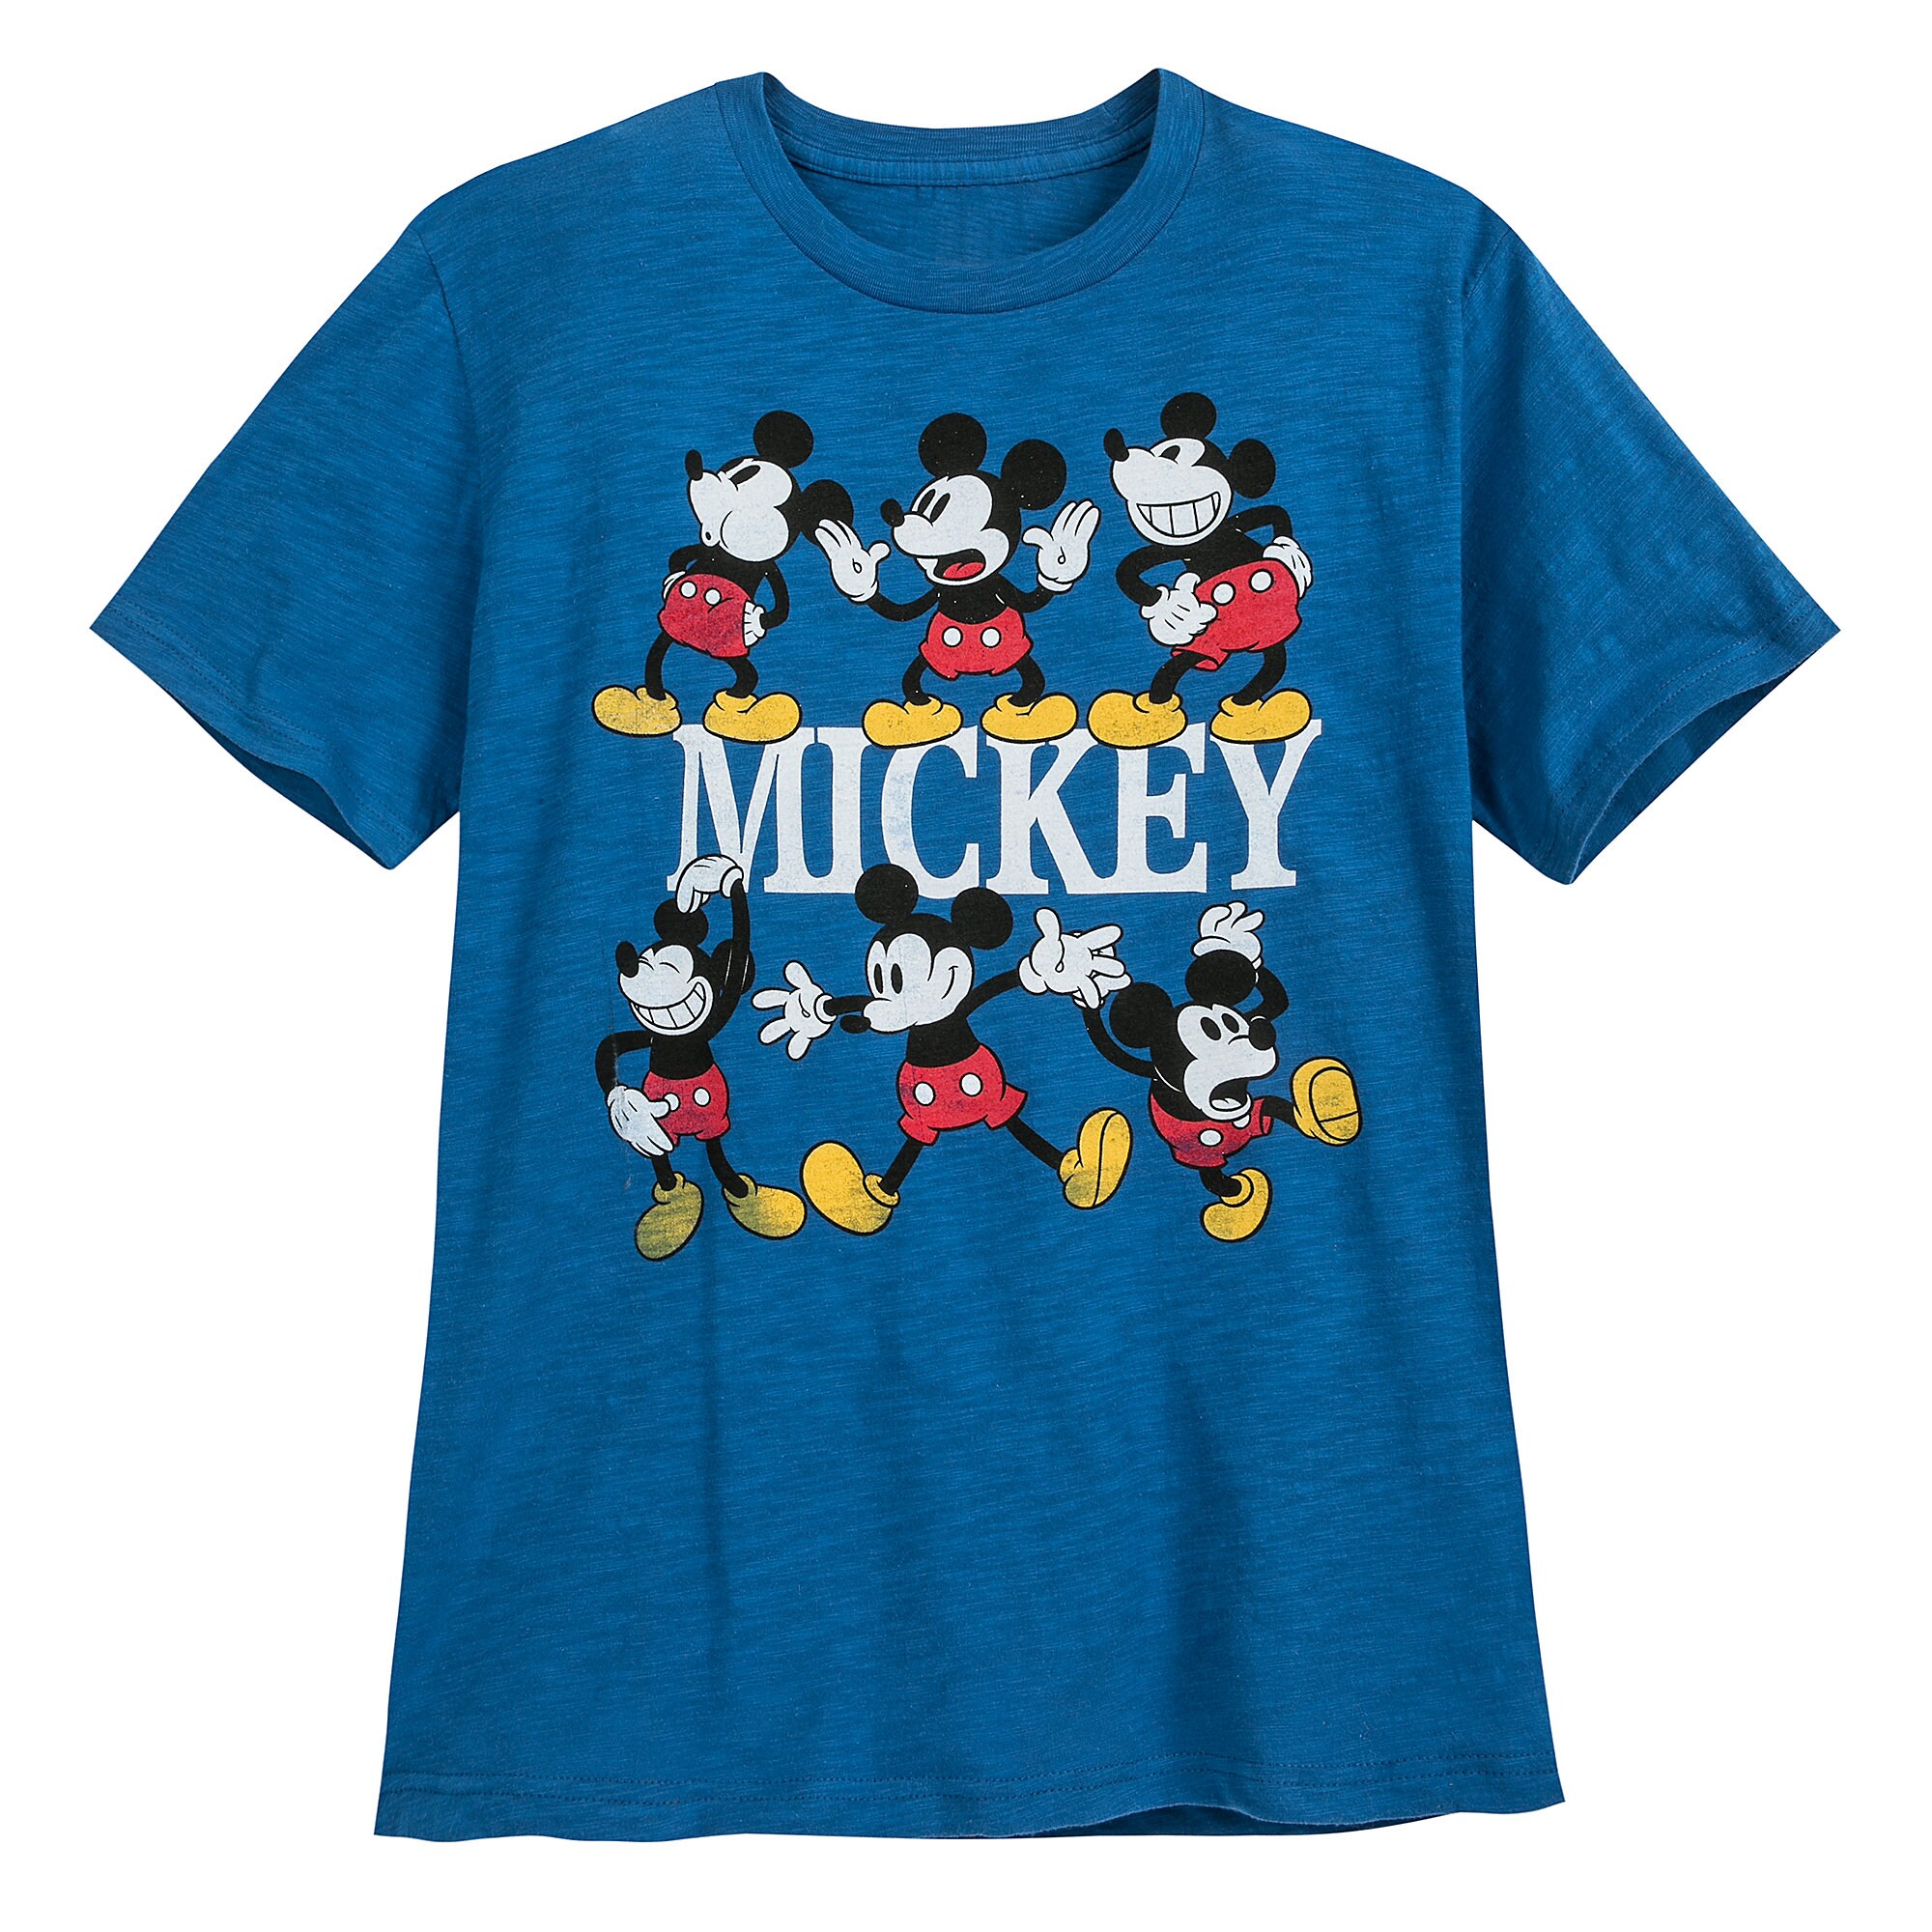 Mickey Mouse Multi-Pose T-Shirt for Men